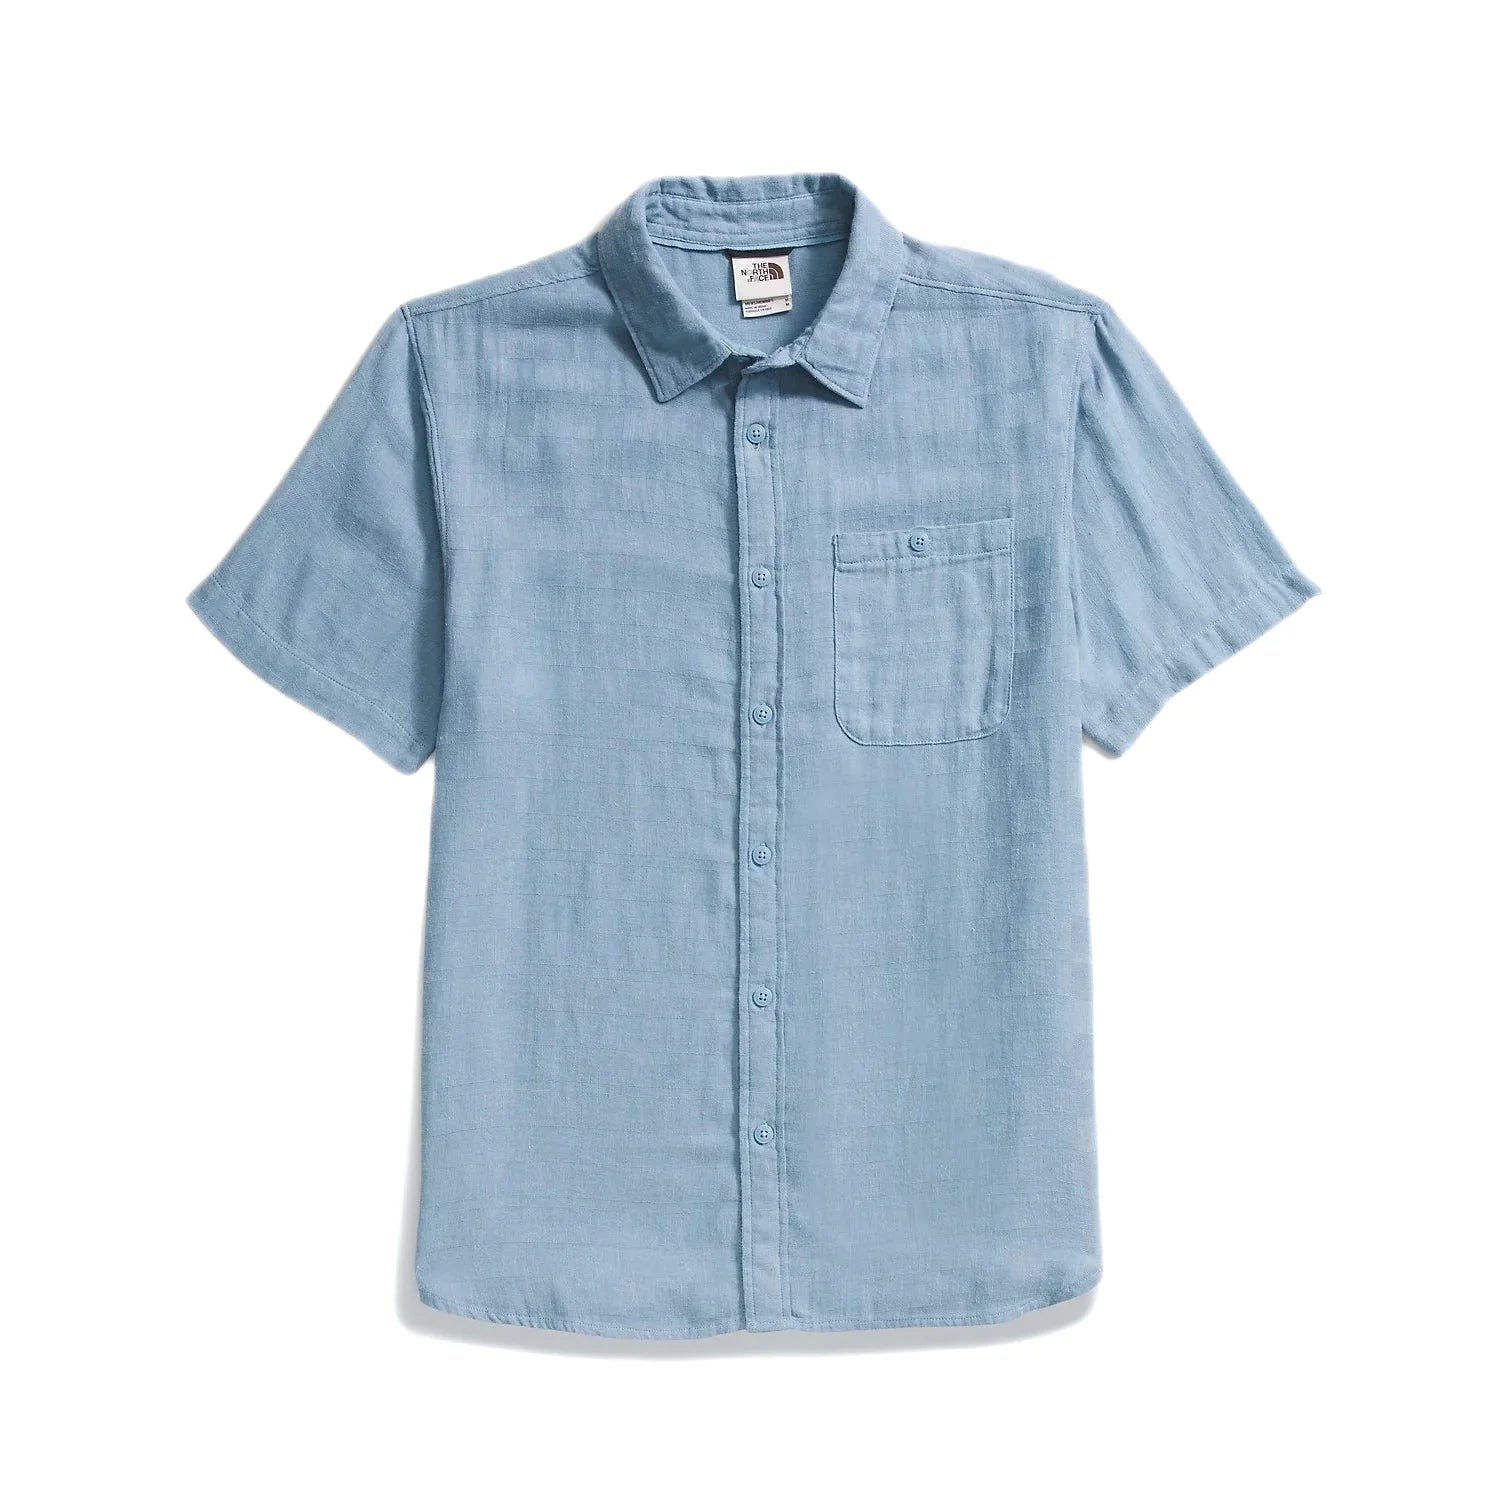 The North Face Men's Loghill Jacquard Shirt Flat Front